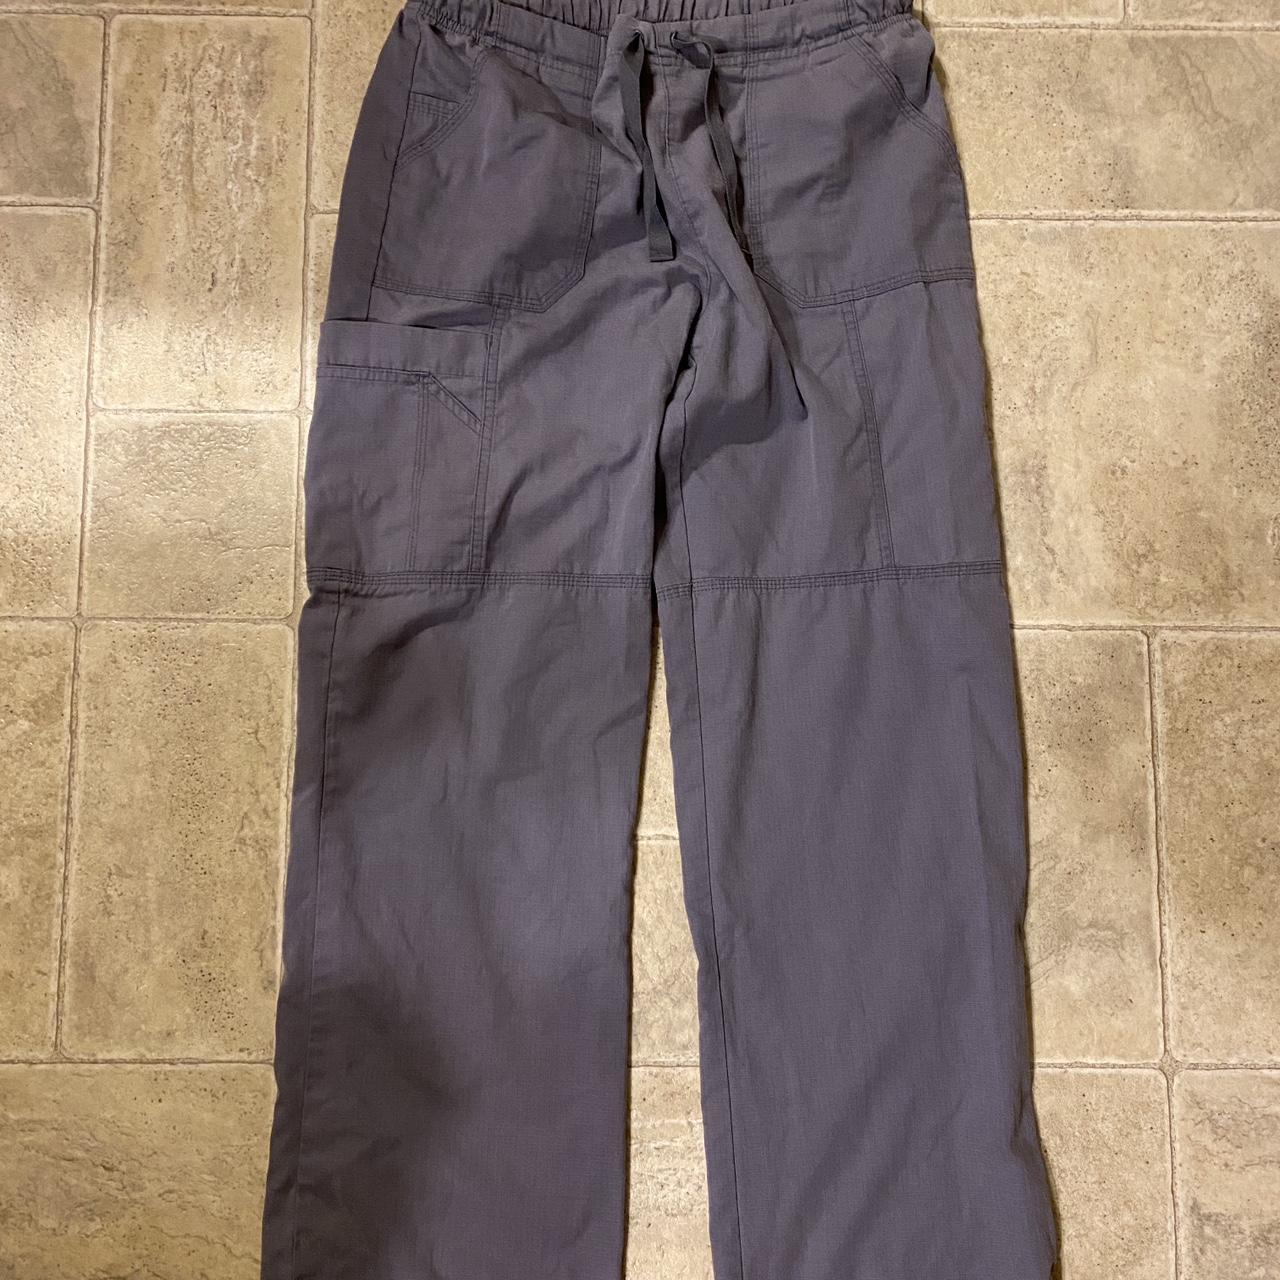 (No PayPal) Carhartt parachute pants Size M In great... - Depop